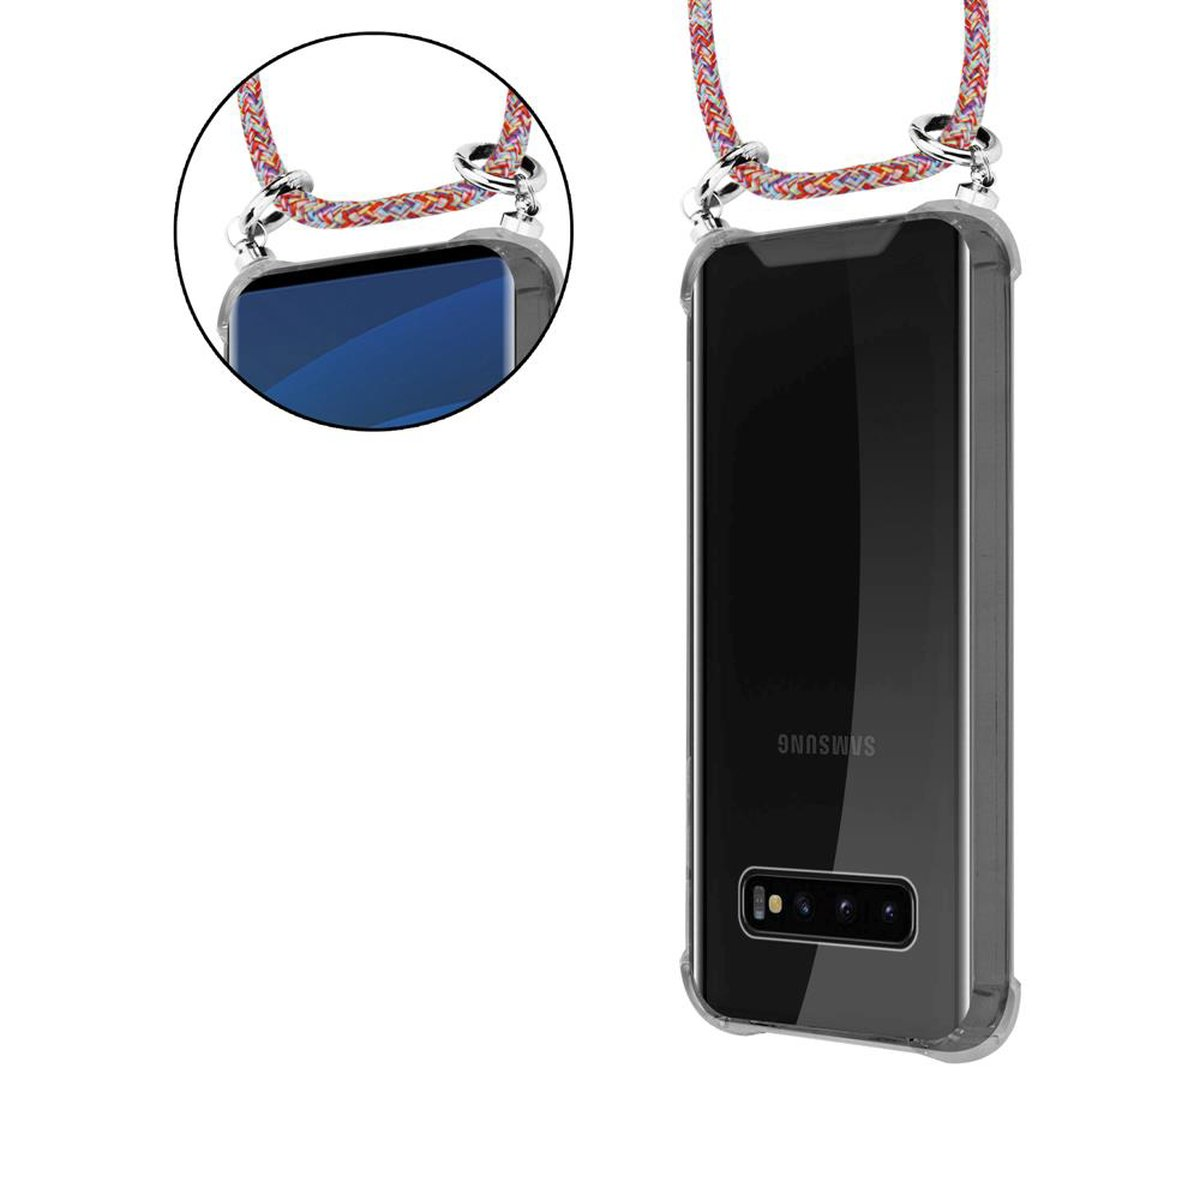 und S10 abnehmbarer COLORFUL Silber PLUS, PARROT Ringen, Samsung, Kordel Hülle, Handy Backcover, Kette CADORABO Galaxy Band mit